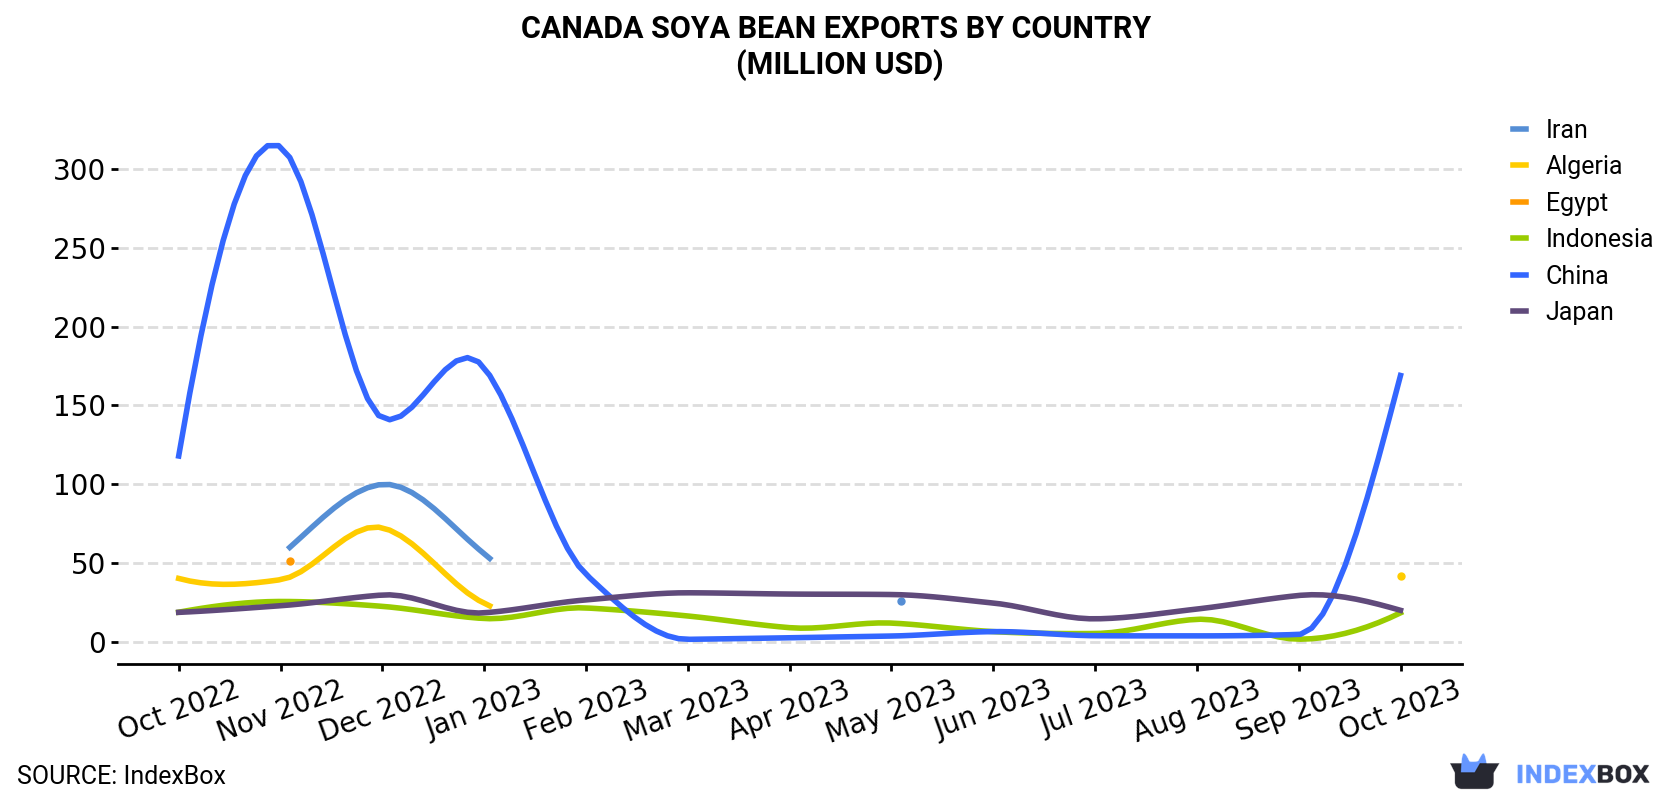 Canada Soya Bean Exports By Country (Million USD)